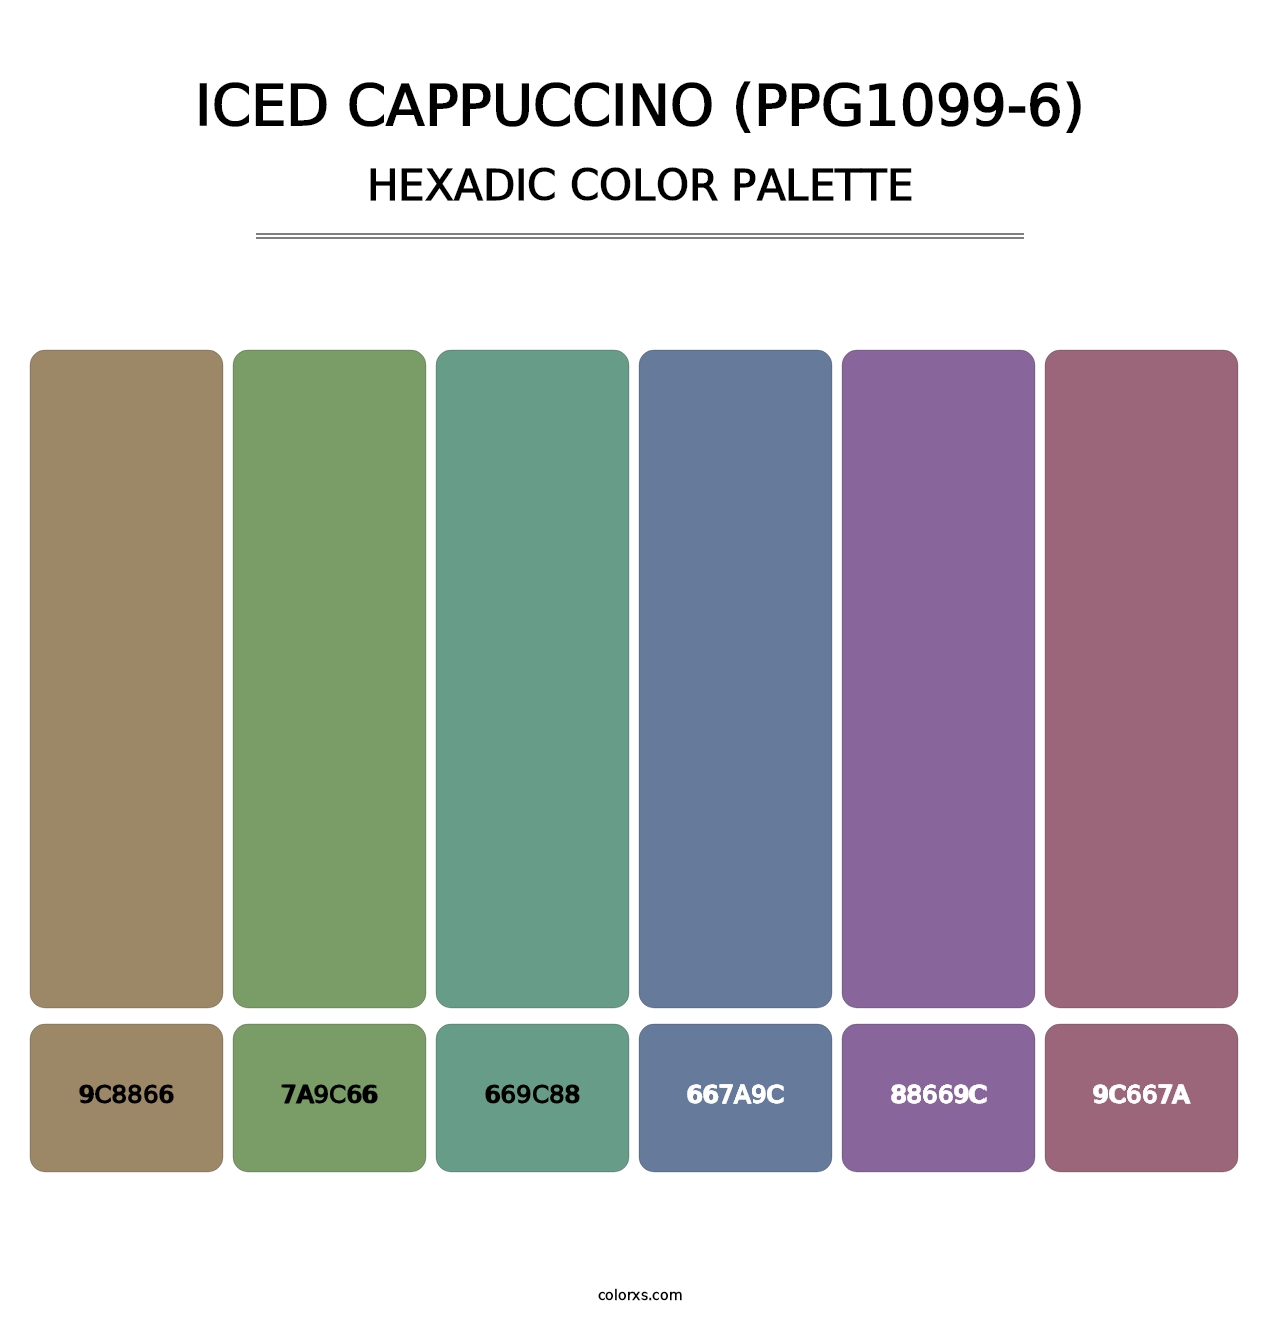 Iced Cappuccino (PPG1099-6) - Hexadic Color Palette